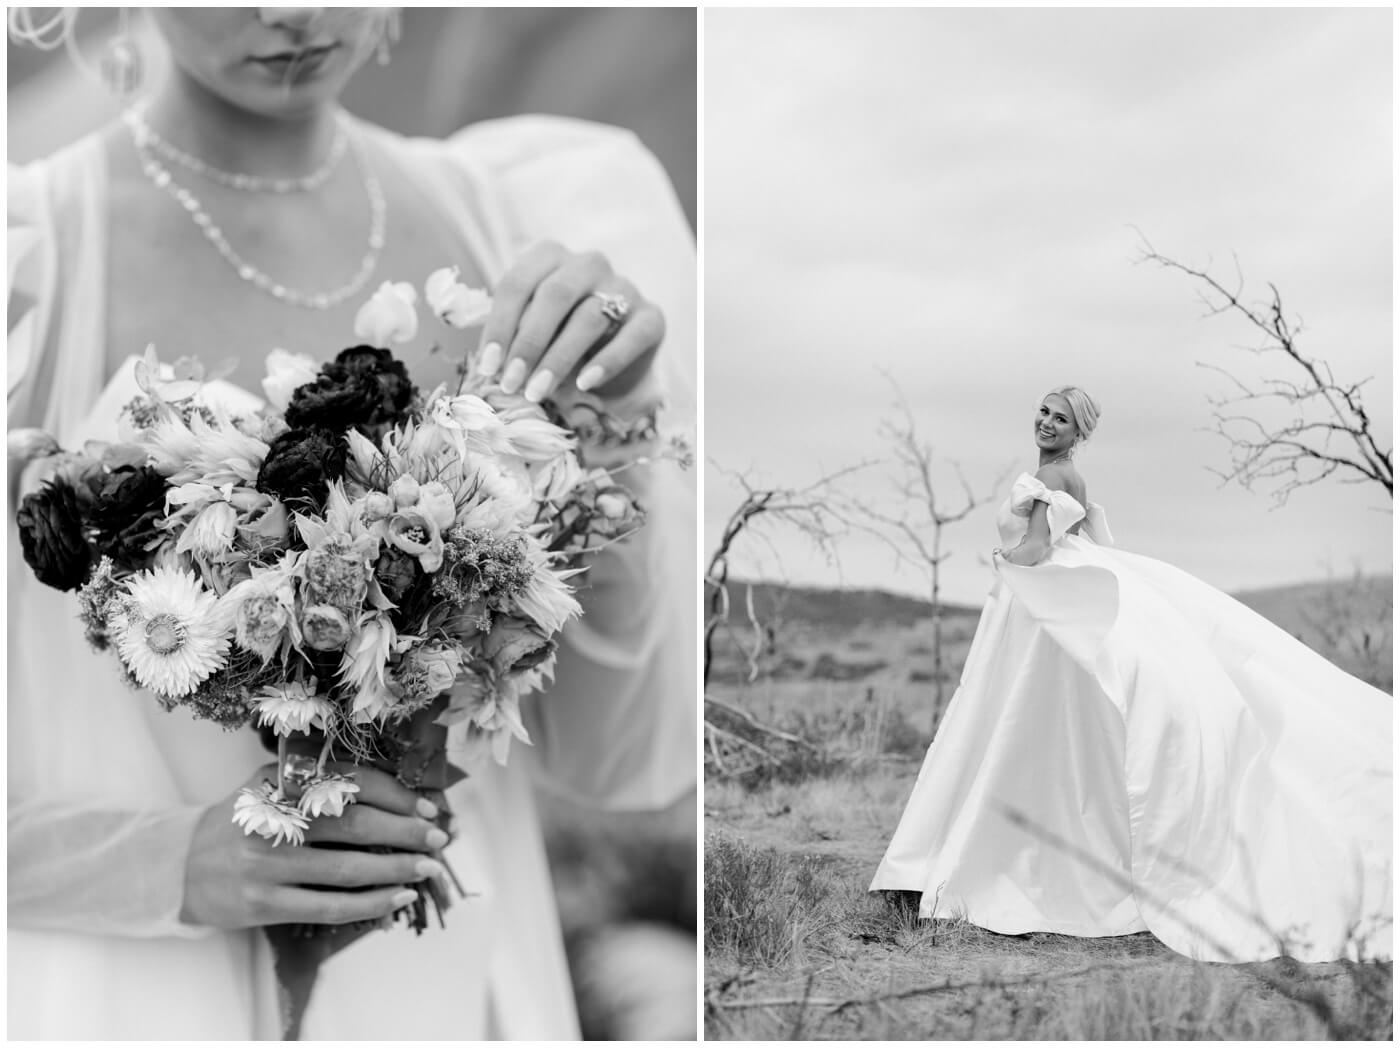 Wedding in the mountains | A bride smiles holding flowers on her wedding day as her dress blows in the wind. 